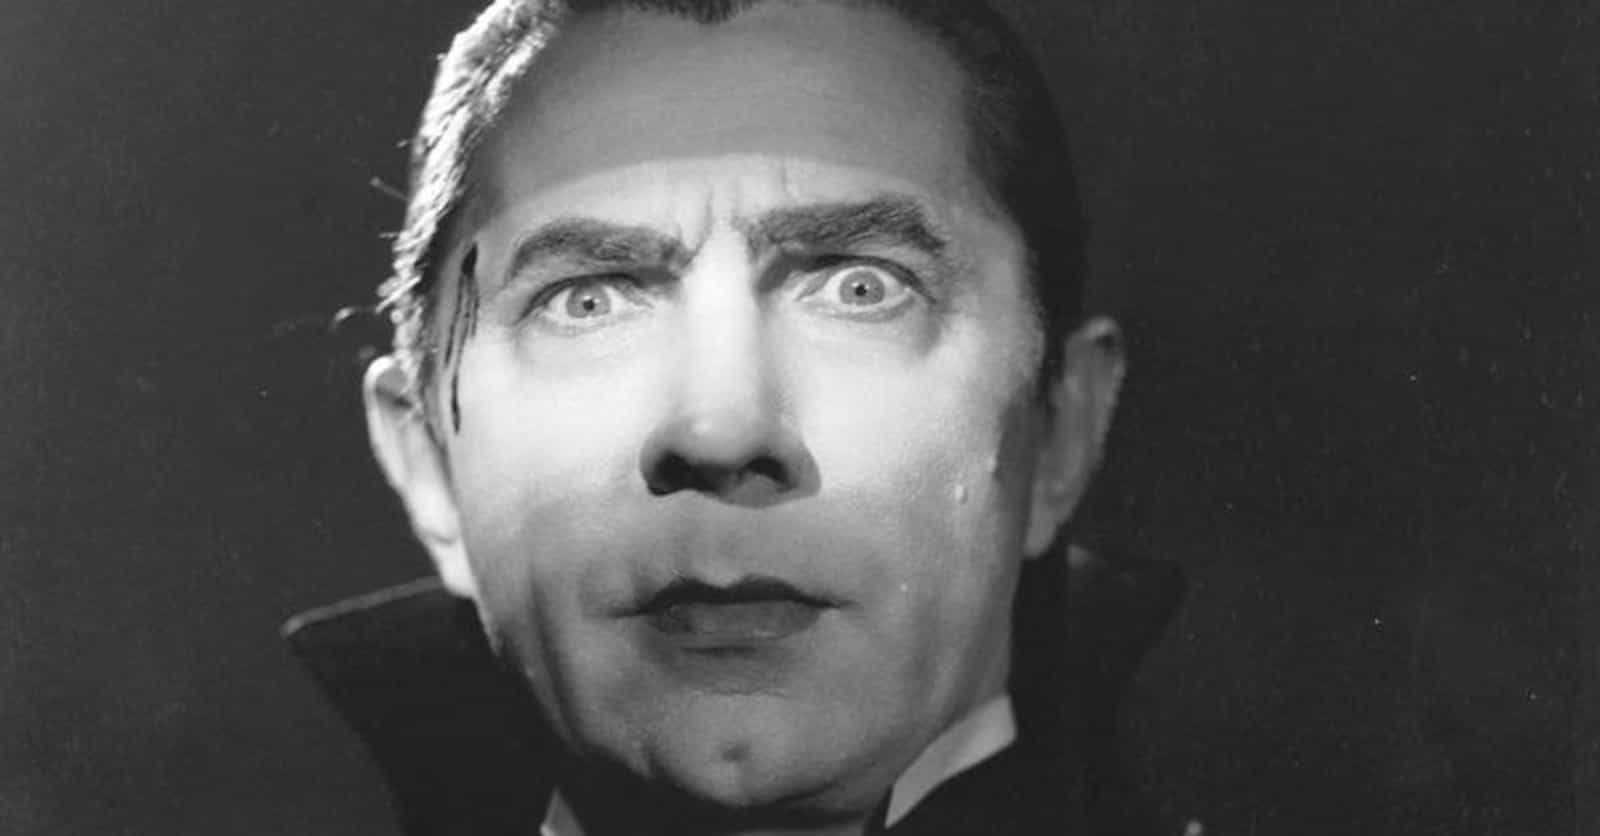 From Obscurity To Old Hollywood Monster Movies To Destitution: The Rise And Fall Of Bela Lugosi